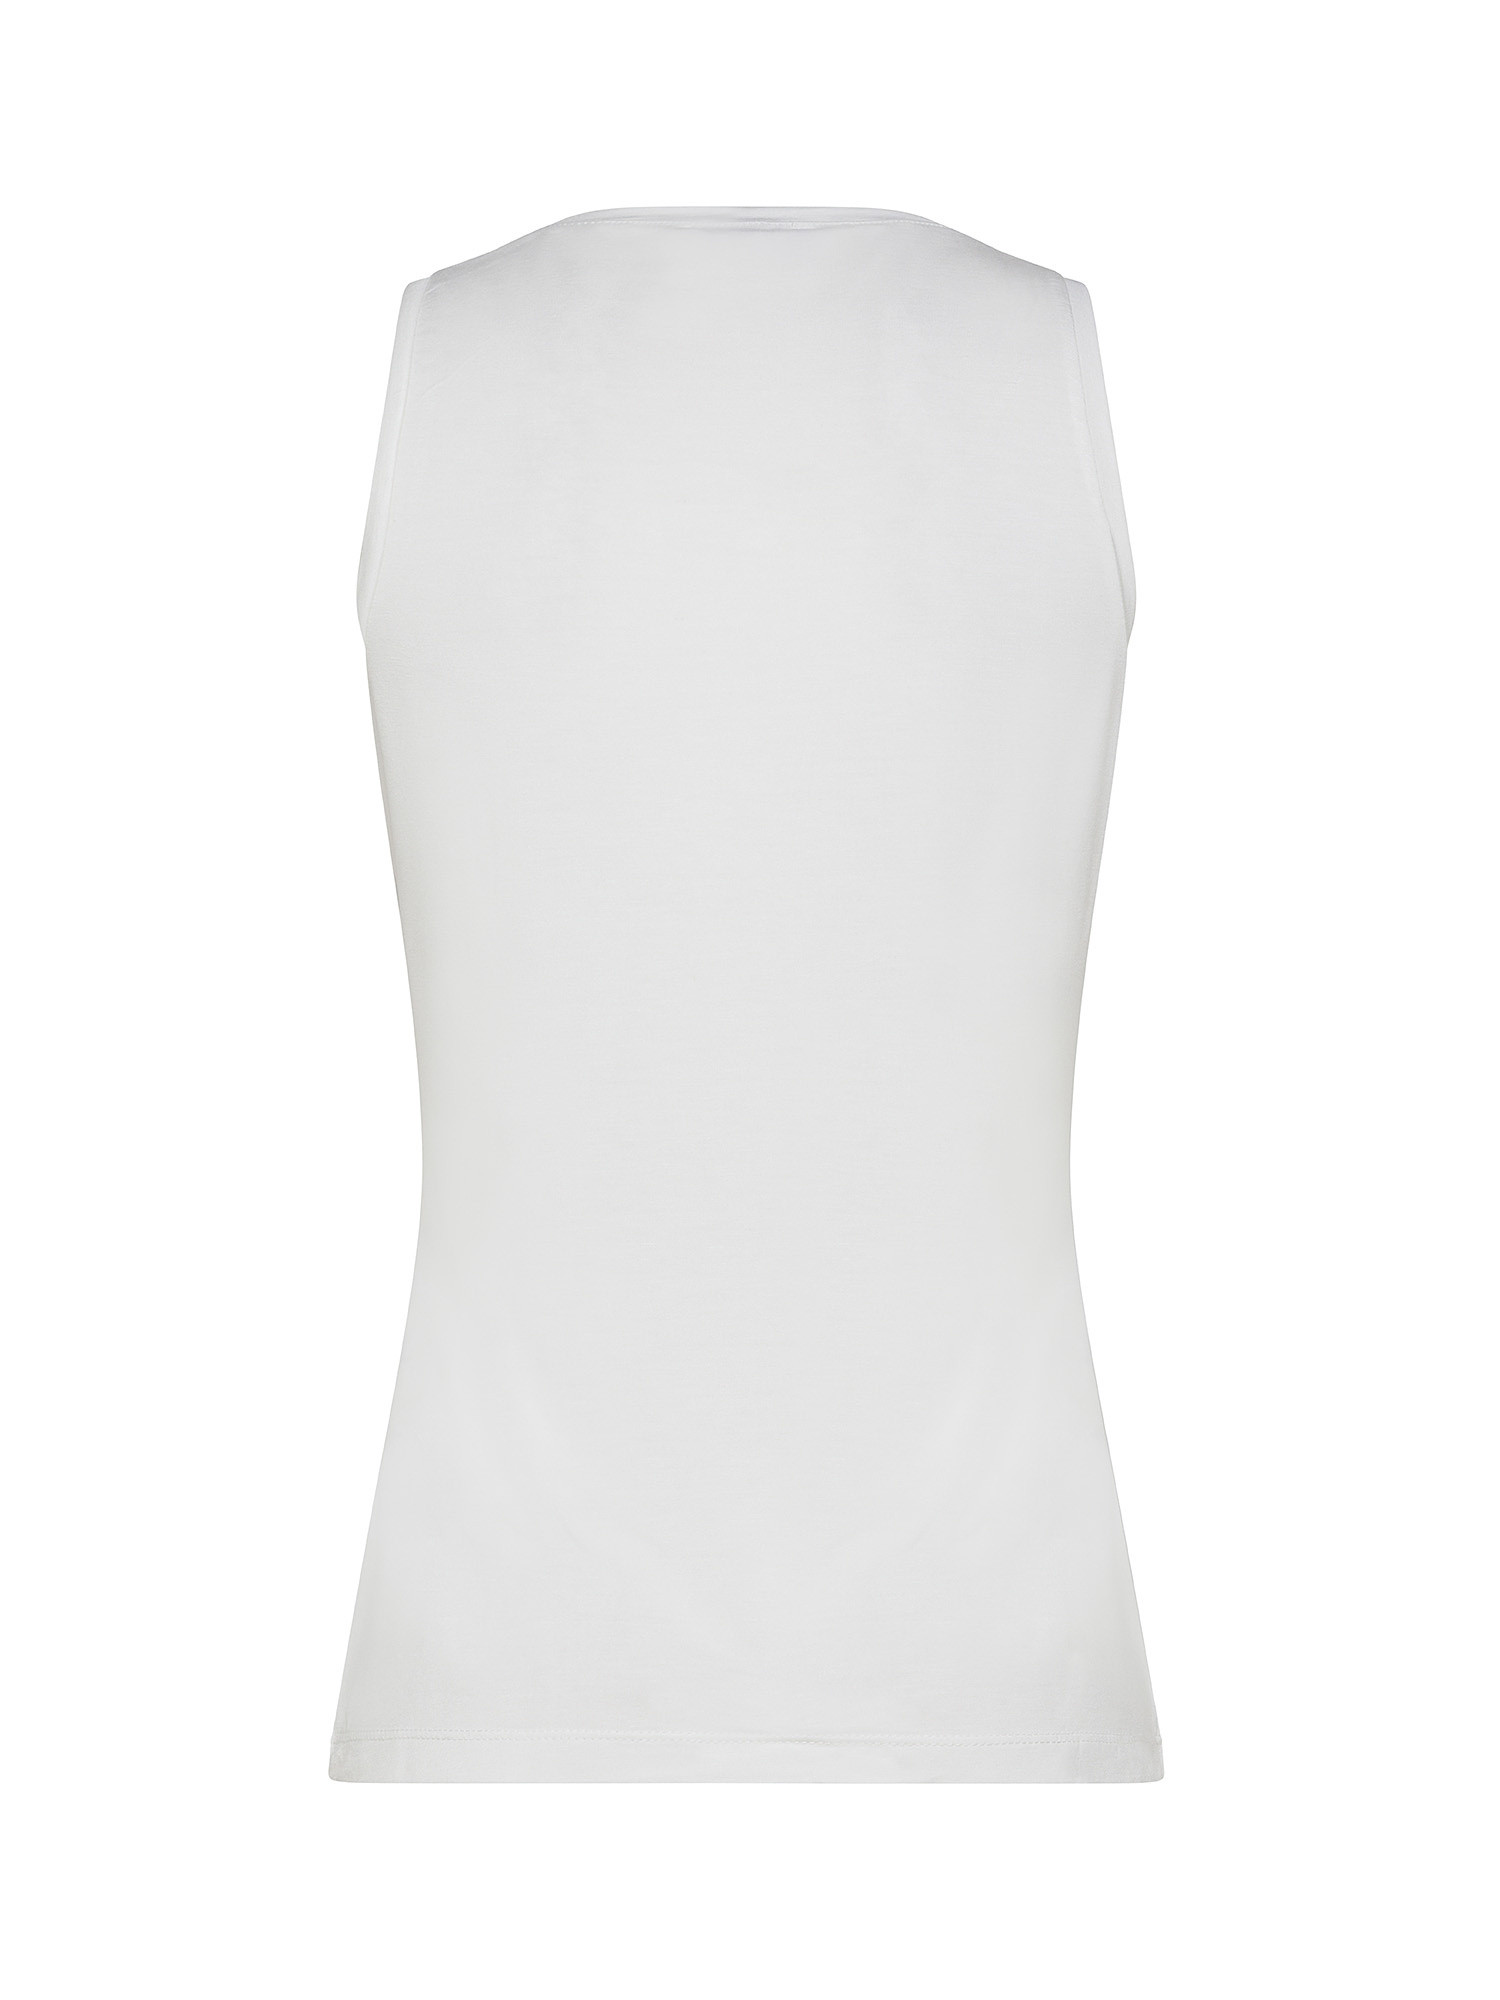 Tank top in solid color bamboo viscose, White, large image number 1